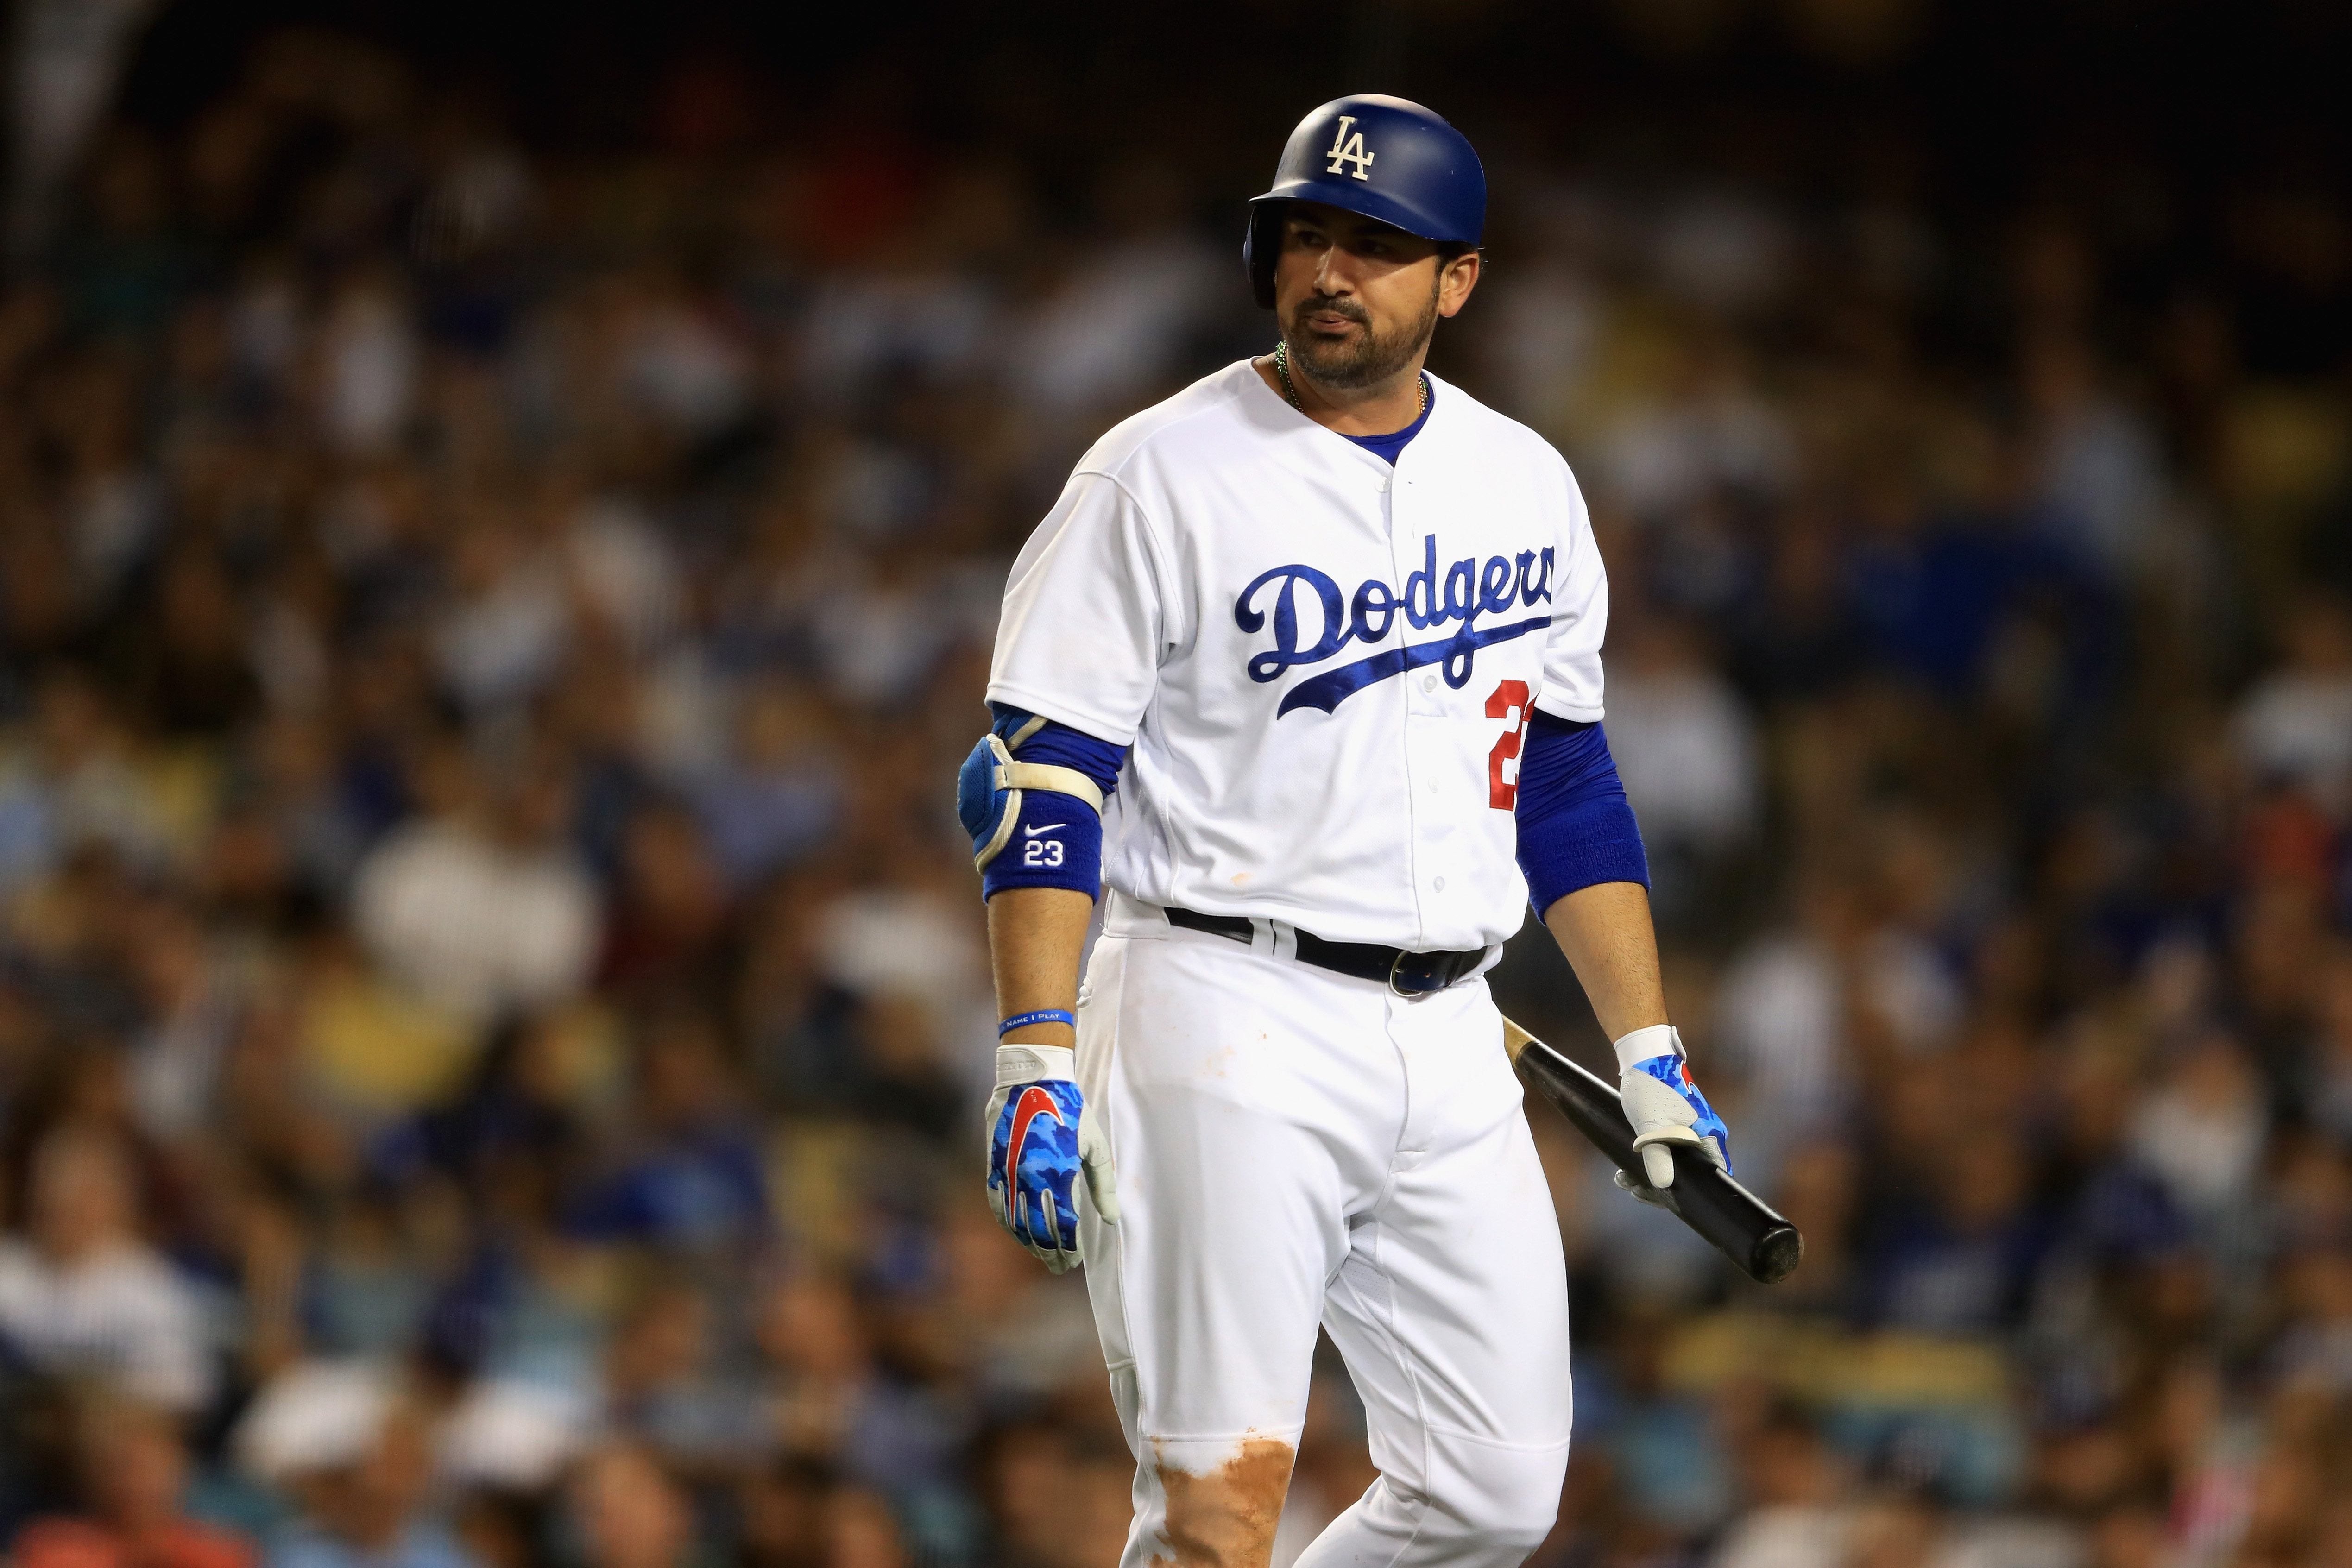 Adrian Gonzalez, who has never been to a World Series, skips World